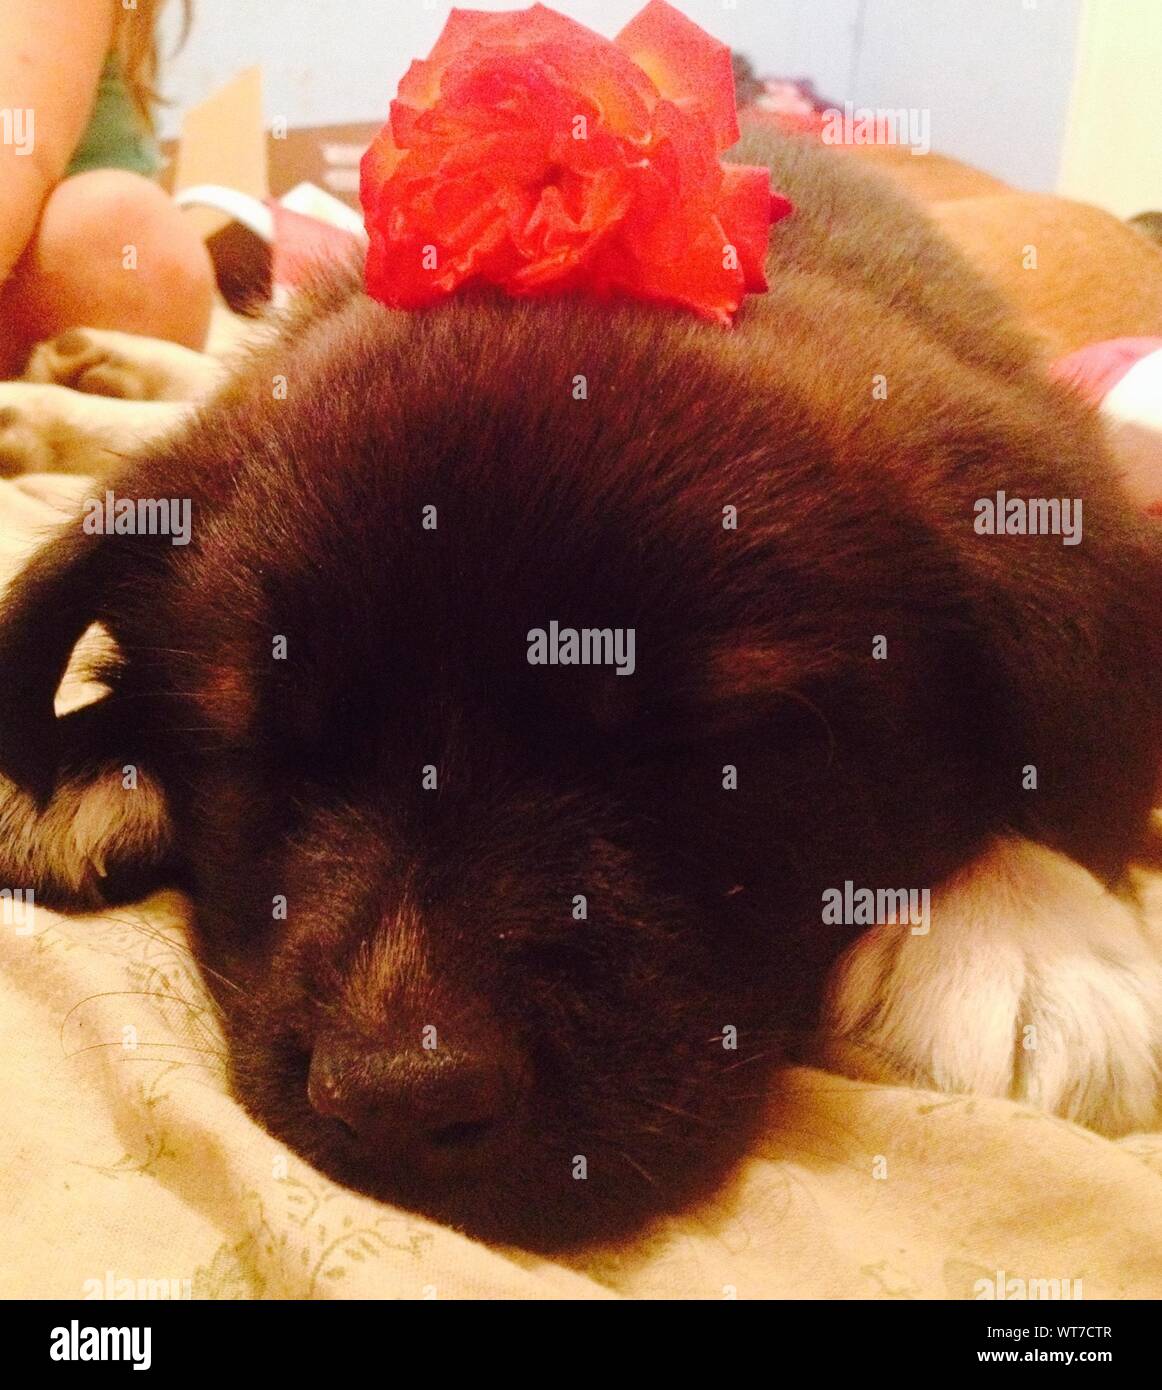 Red Flower On Top Of Cute Puppy Sleeping On Bed Stock Photo